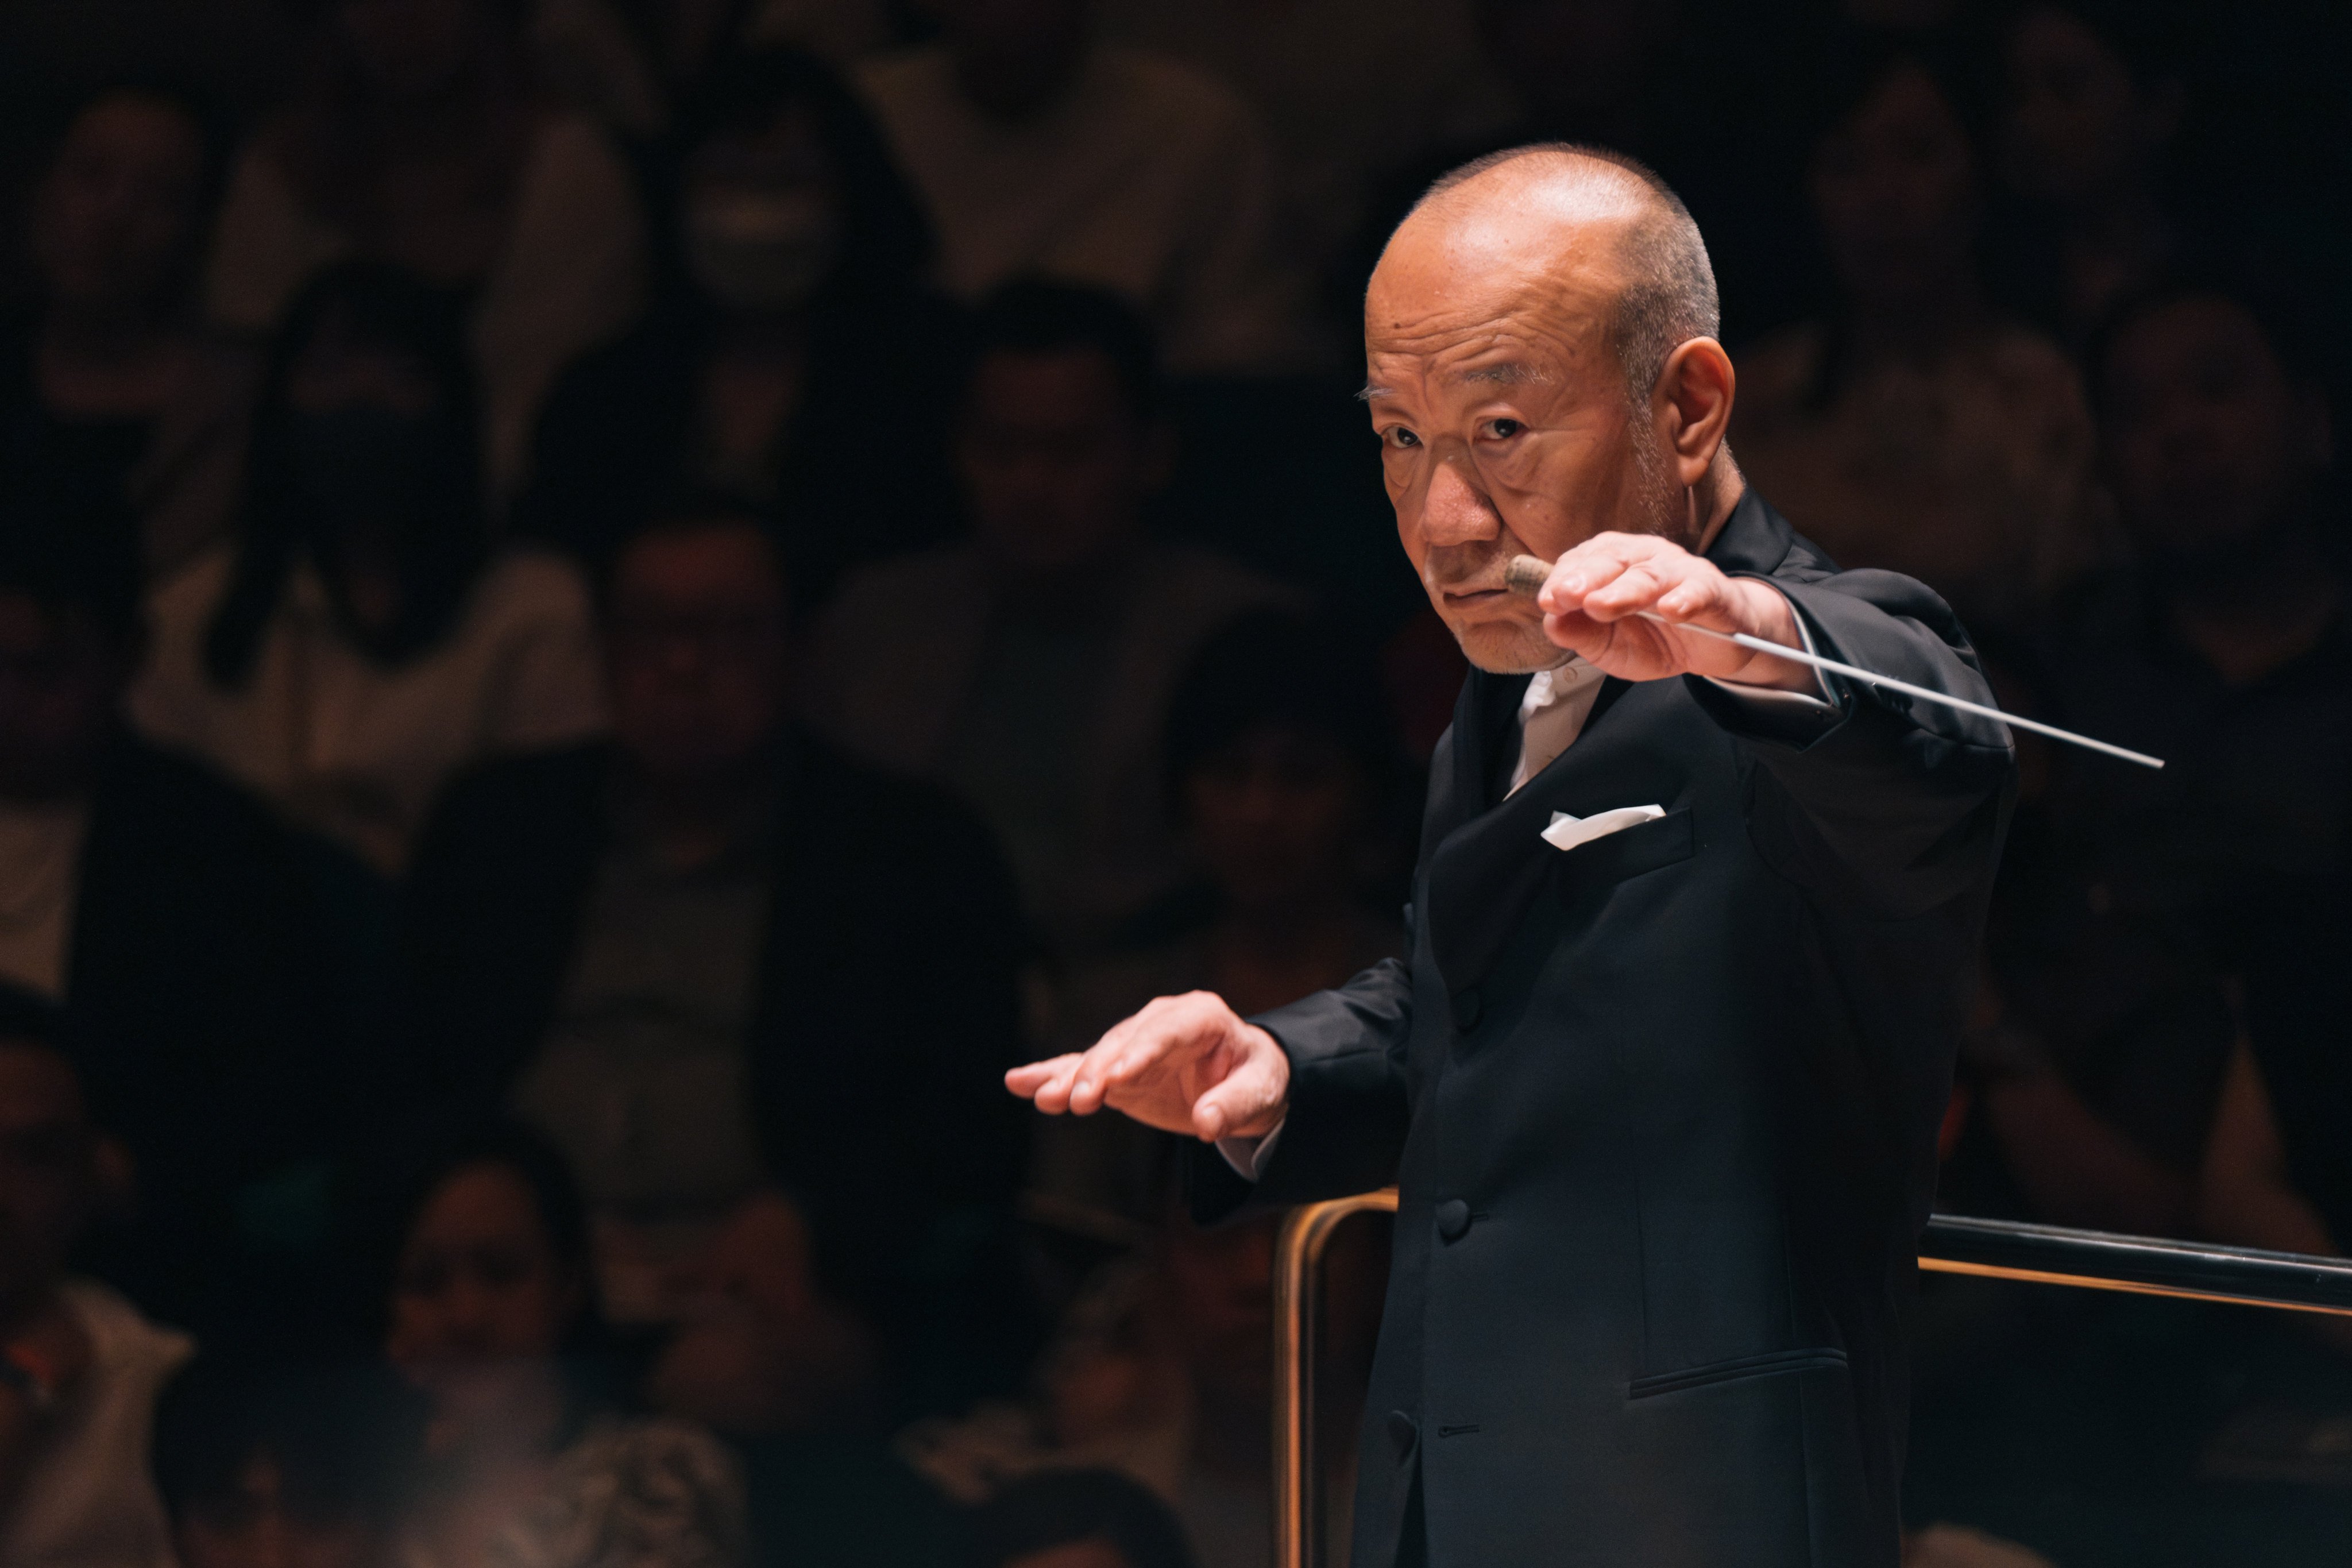 The Japanese composer Joe Hisaishi, best known for writing the soundtracks of Studio Ghibli’s much-loved animated films, conducted the Hong Kong Philharmonic Orchestra in a series of concerts featuring his works from June 22-24, 2023 (Credit: Ka Lam/ Hong Kong Phil)